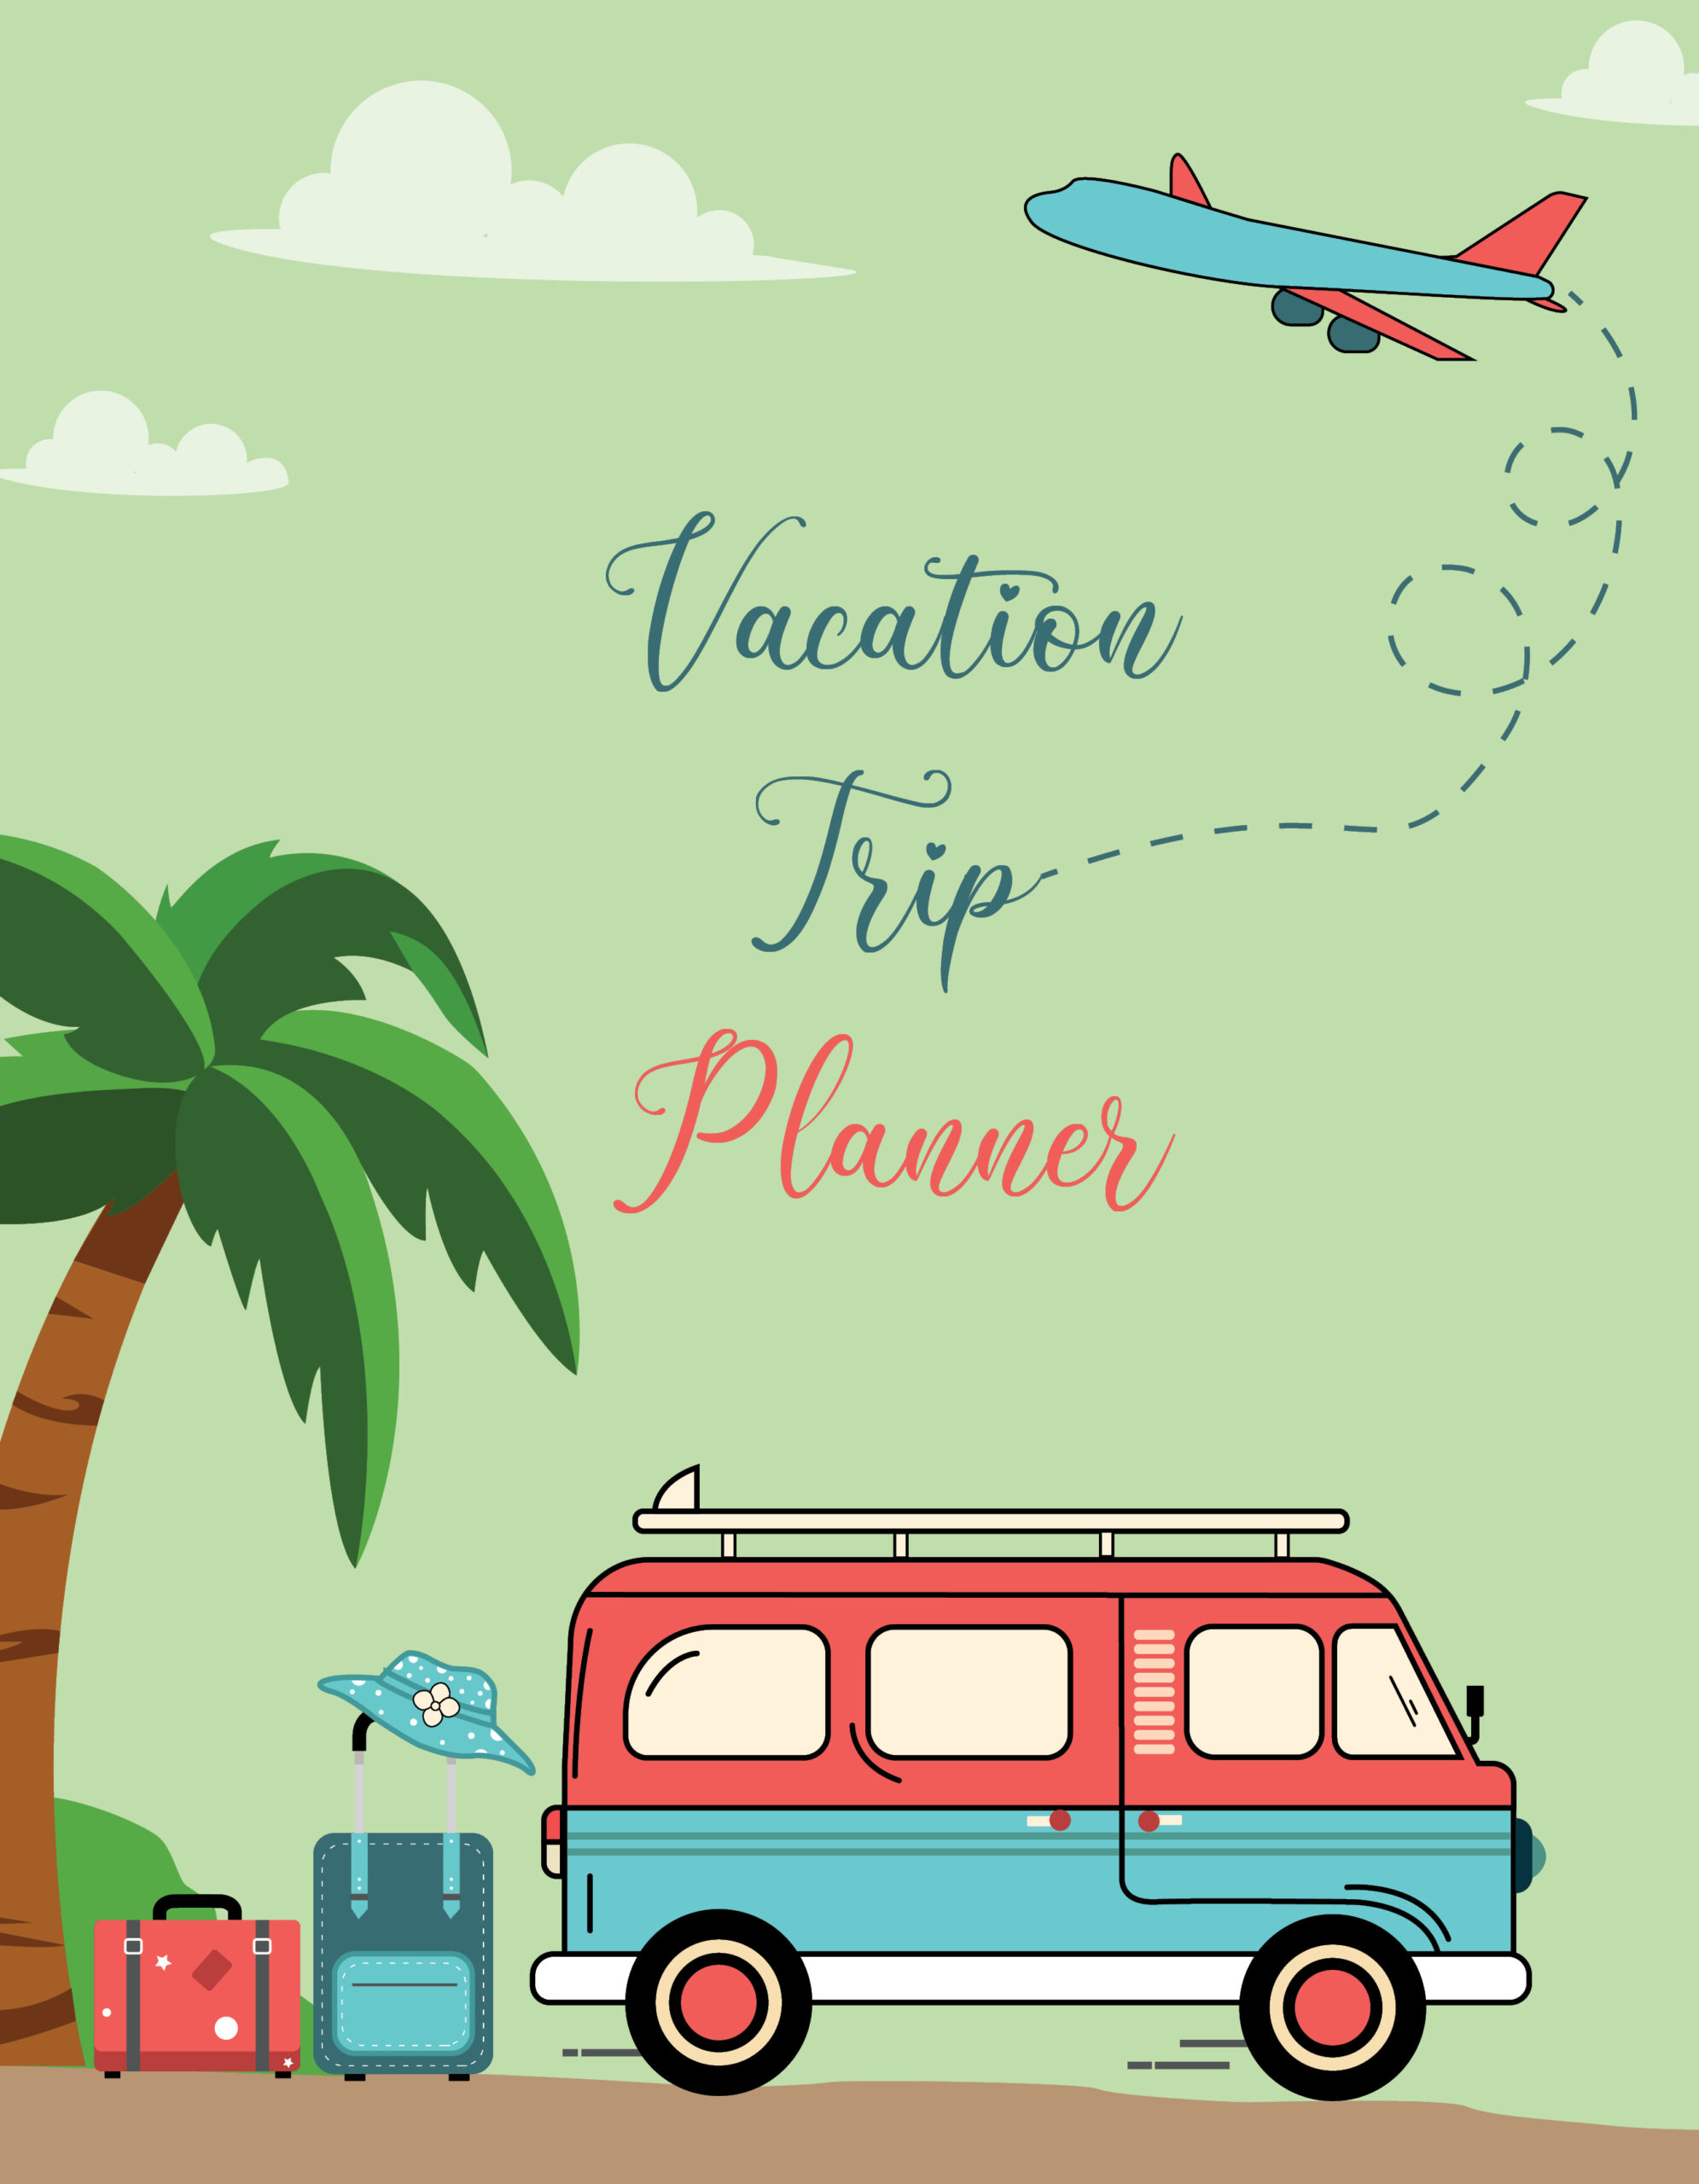 Vacation Trip Planner Letter Size 1 scaled